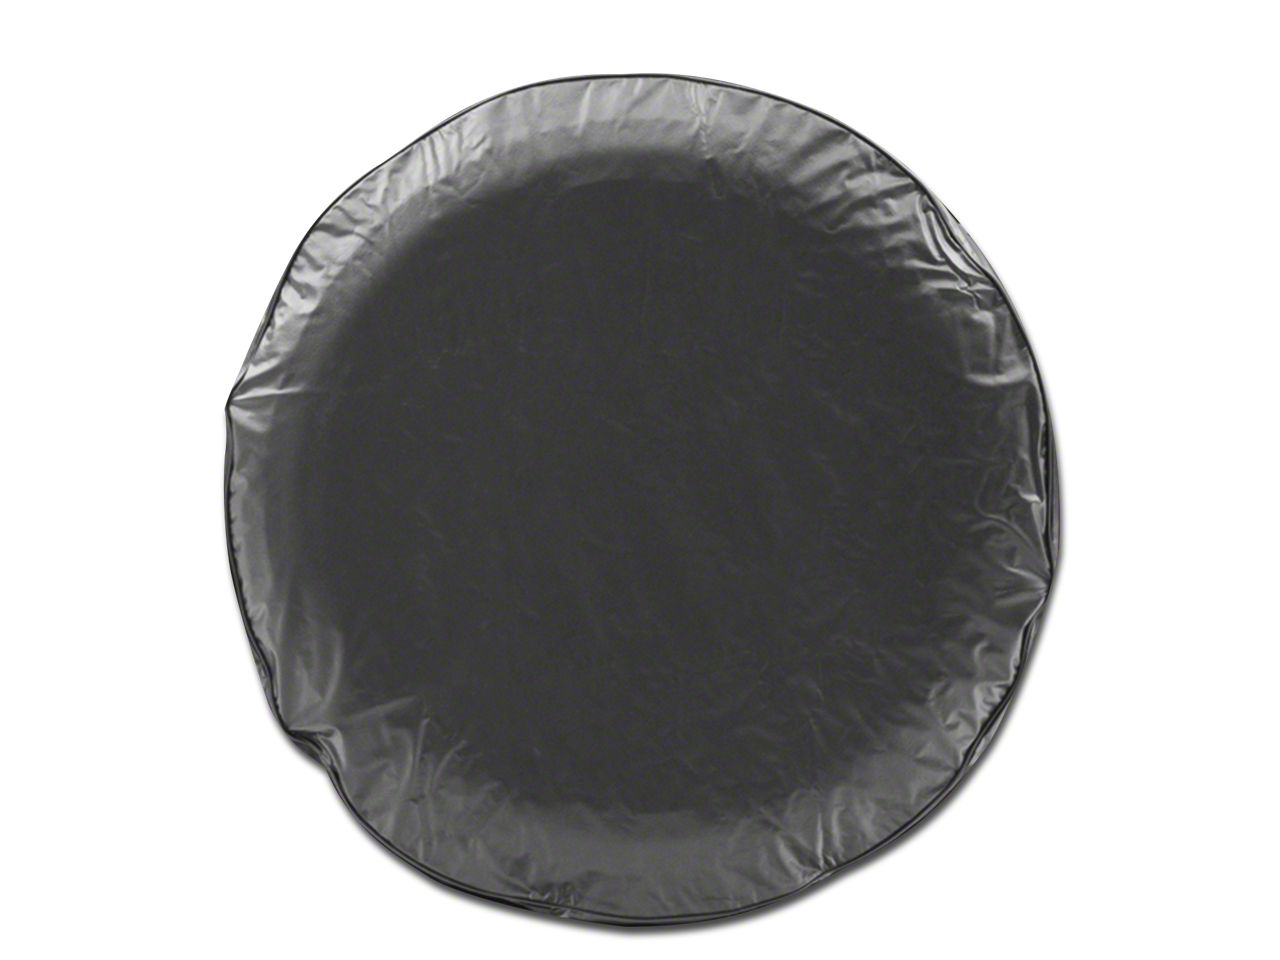 Canyon Tire Covers